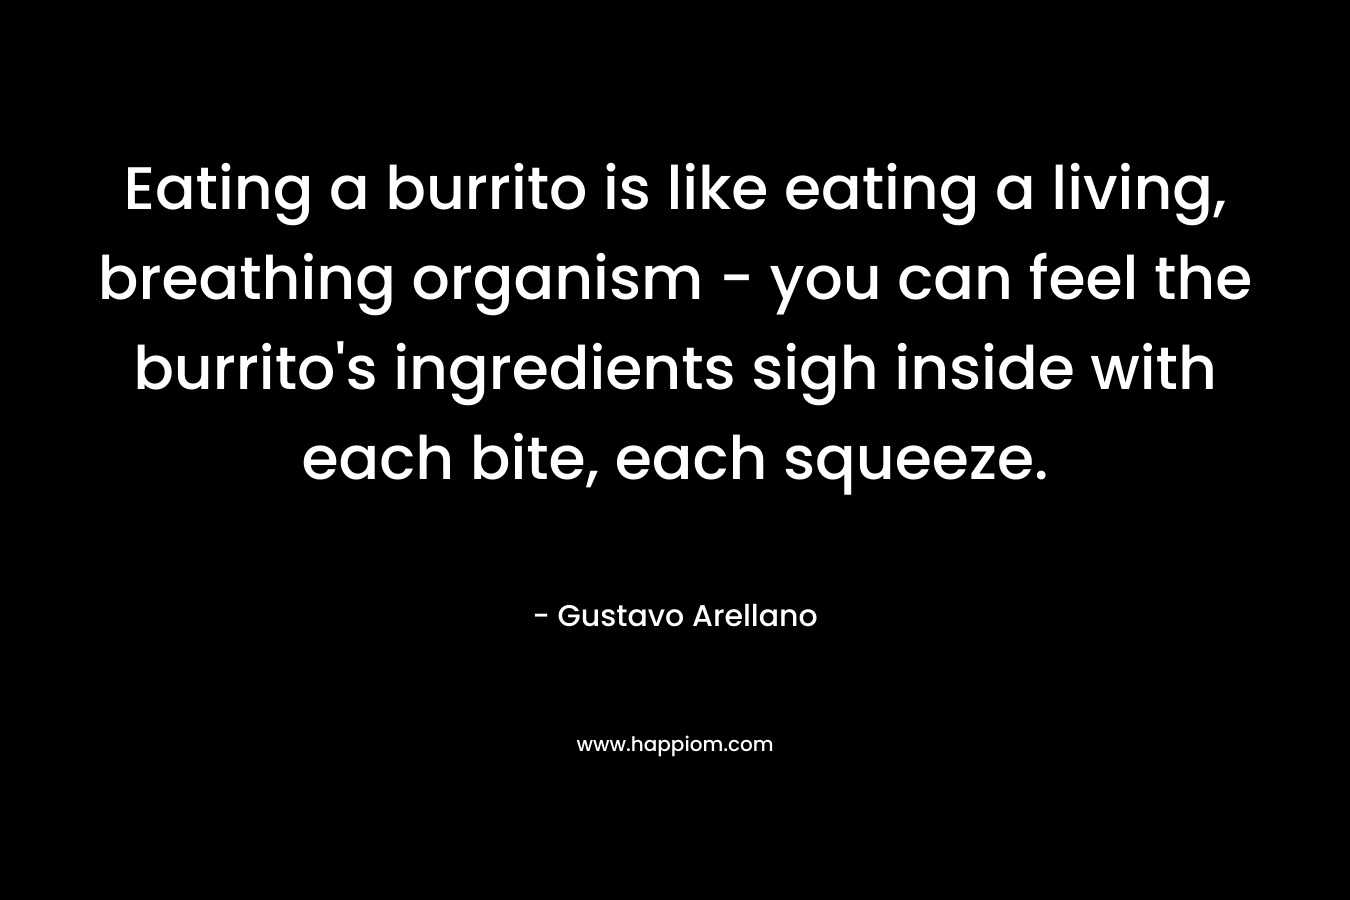 Eating a burrito is like eating a living, breathing organism – you can feel the burrito’s ingredients sigh inside with each bite, each squeeze. – Gustavo Arellano